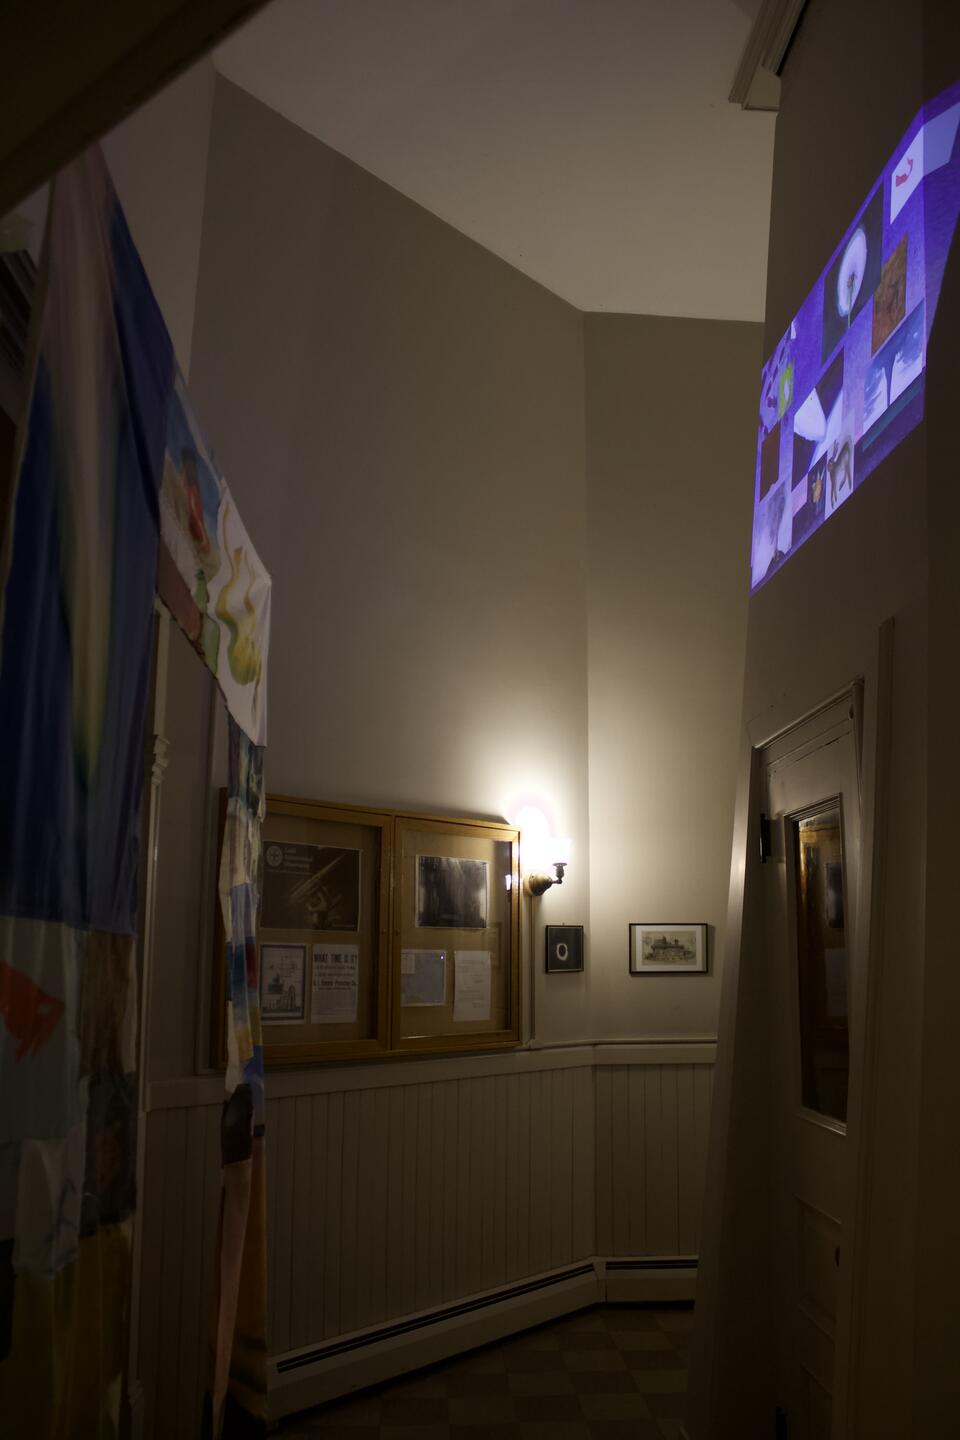 An image of a darkened interior space, a doorway covered in fabric and an animation with multiple moving windows projected on opposite wall